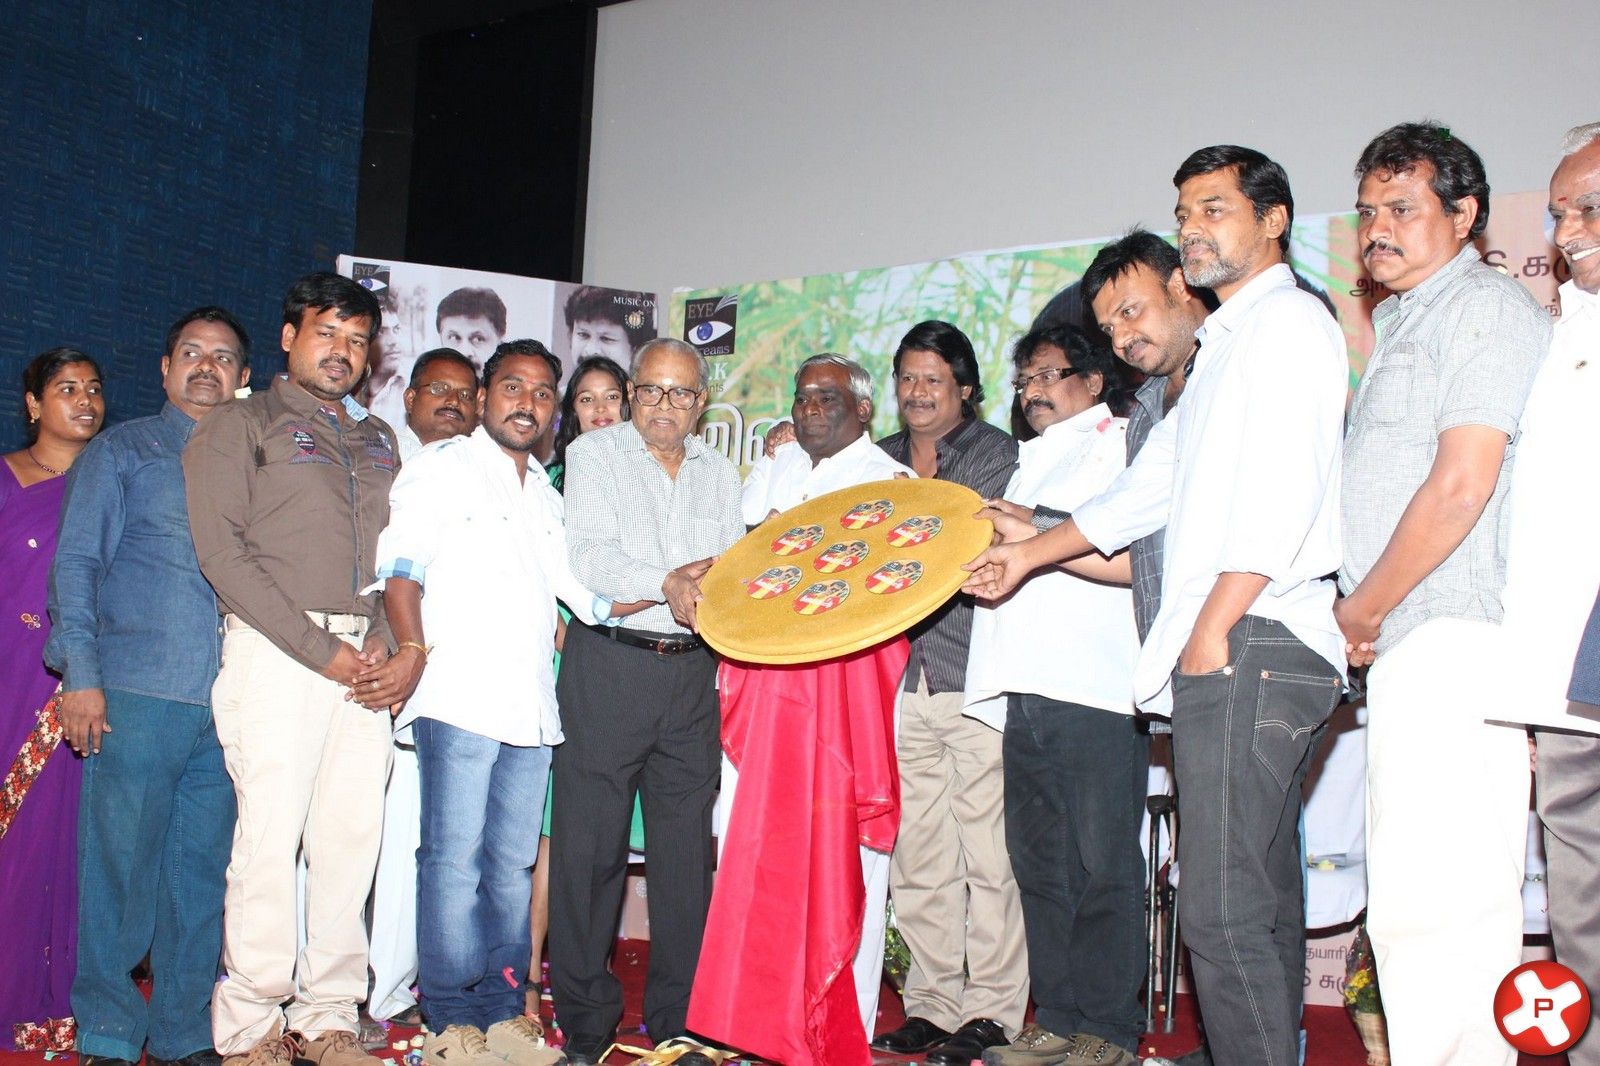 Kallapetty Movie Audio Launch Pictures | Picture 380783